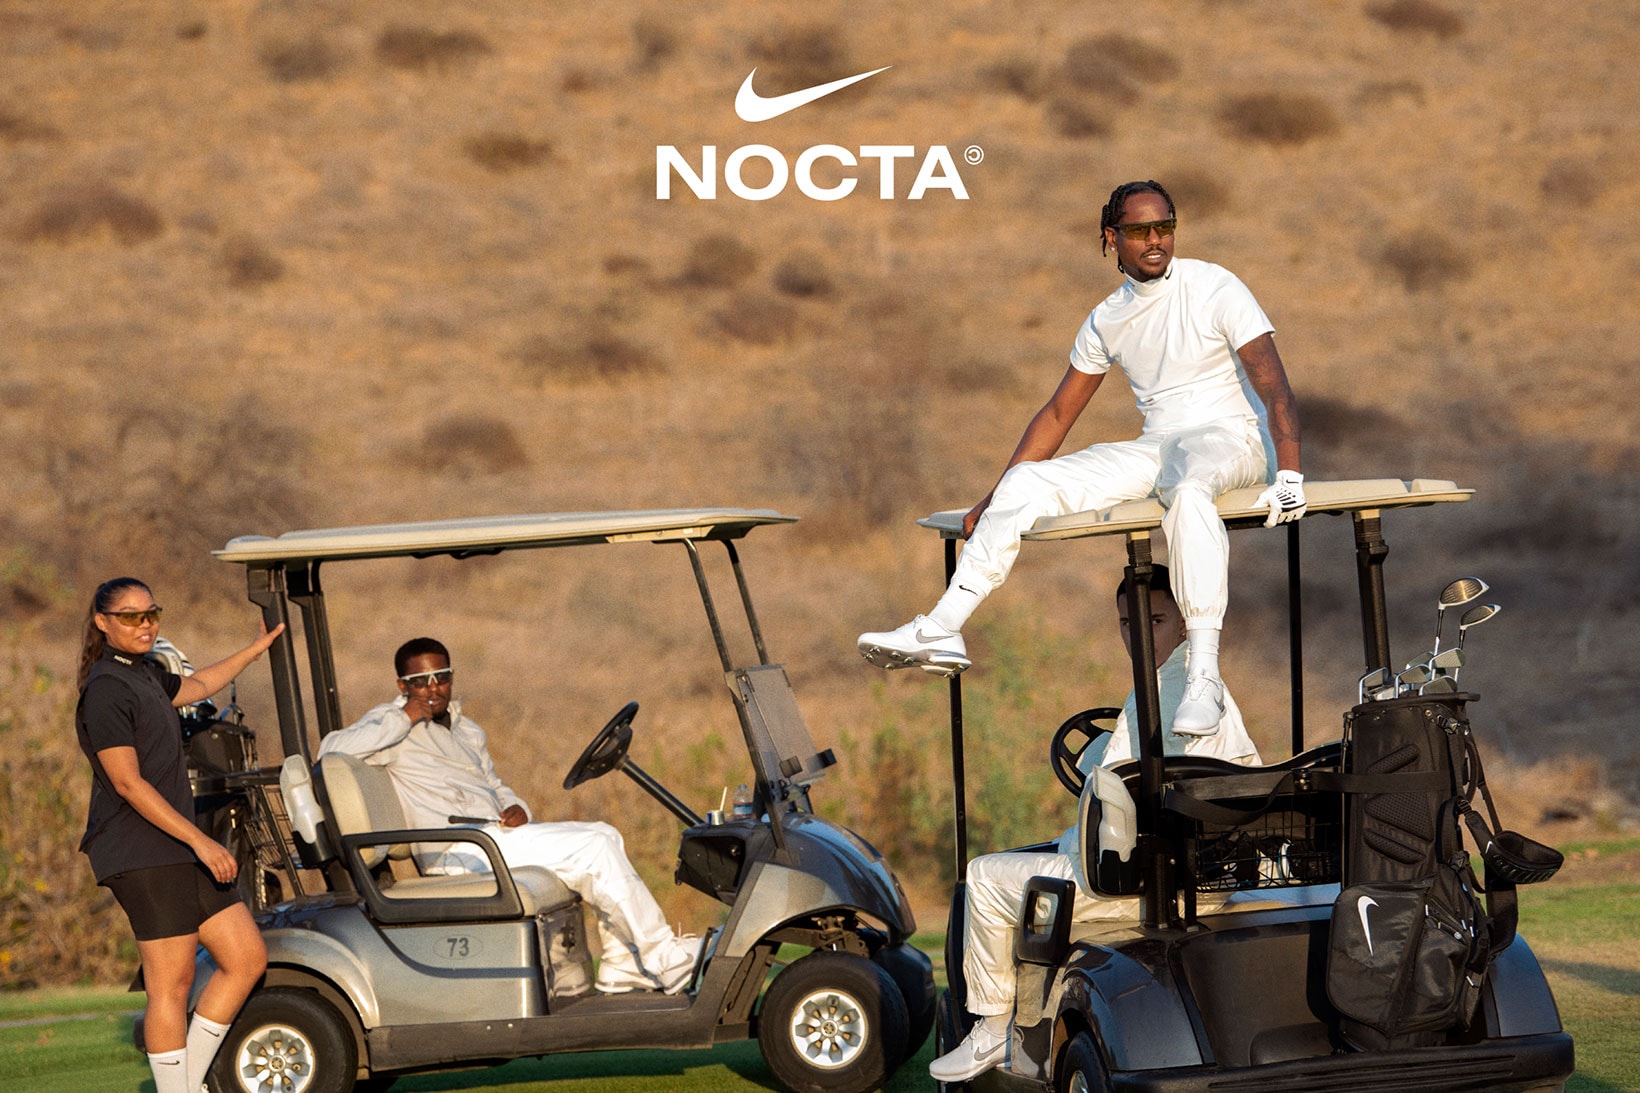 Drake NOCTA Nike Golf Collection Cart Caddy All White Outfit